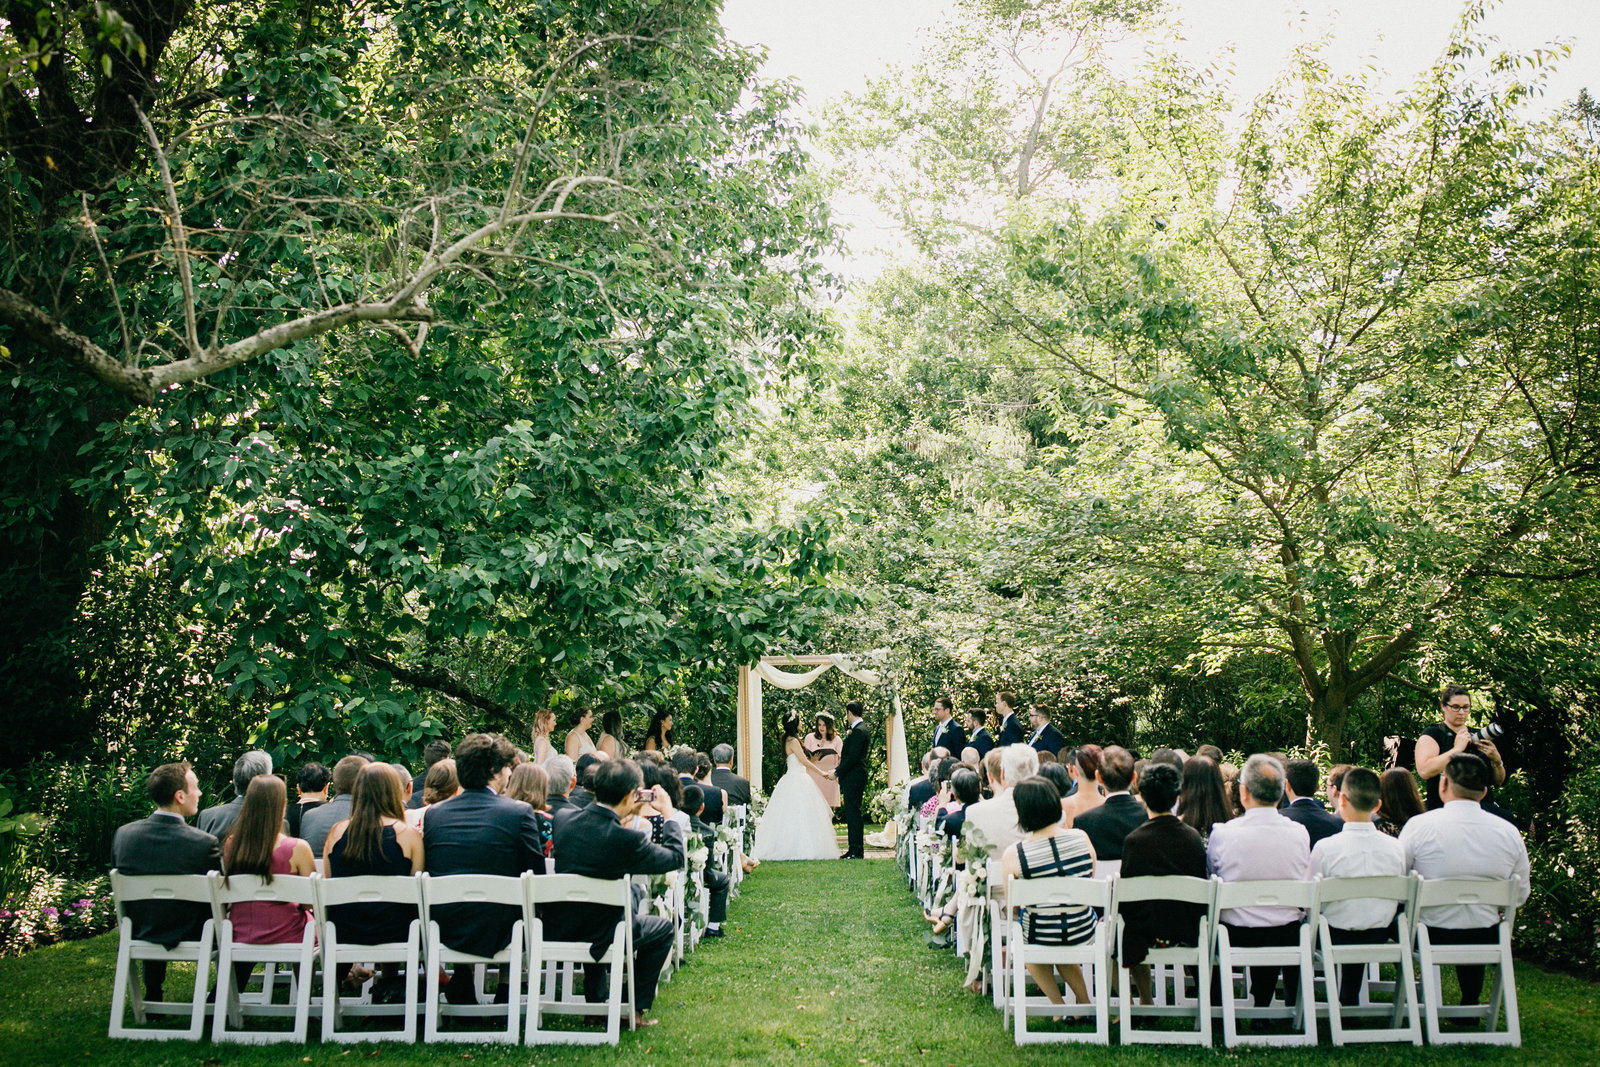 Beautiful outdoor ceremony at the Inn at Fernbrook Farm in New Jersey.